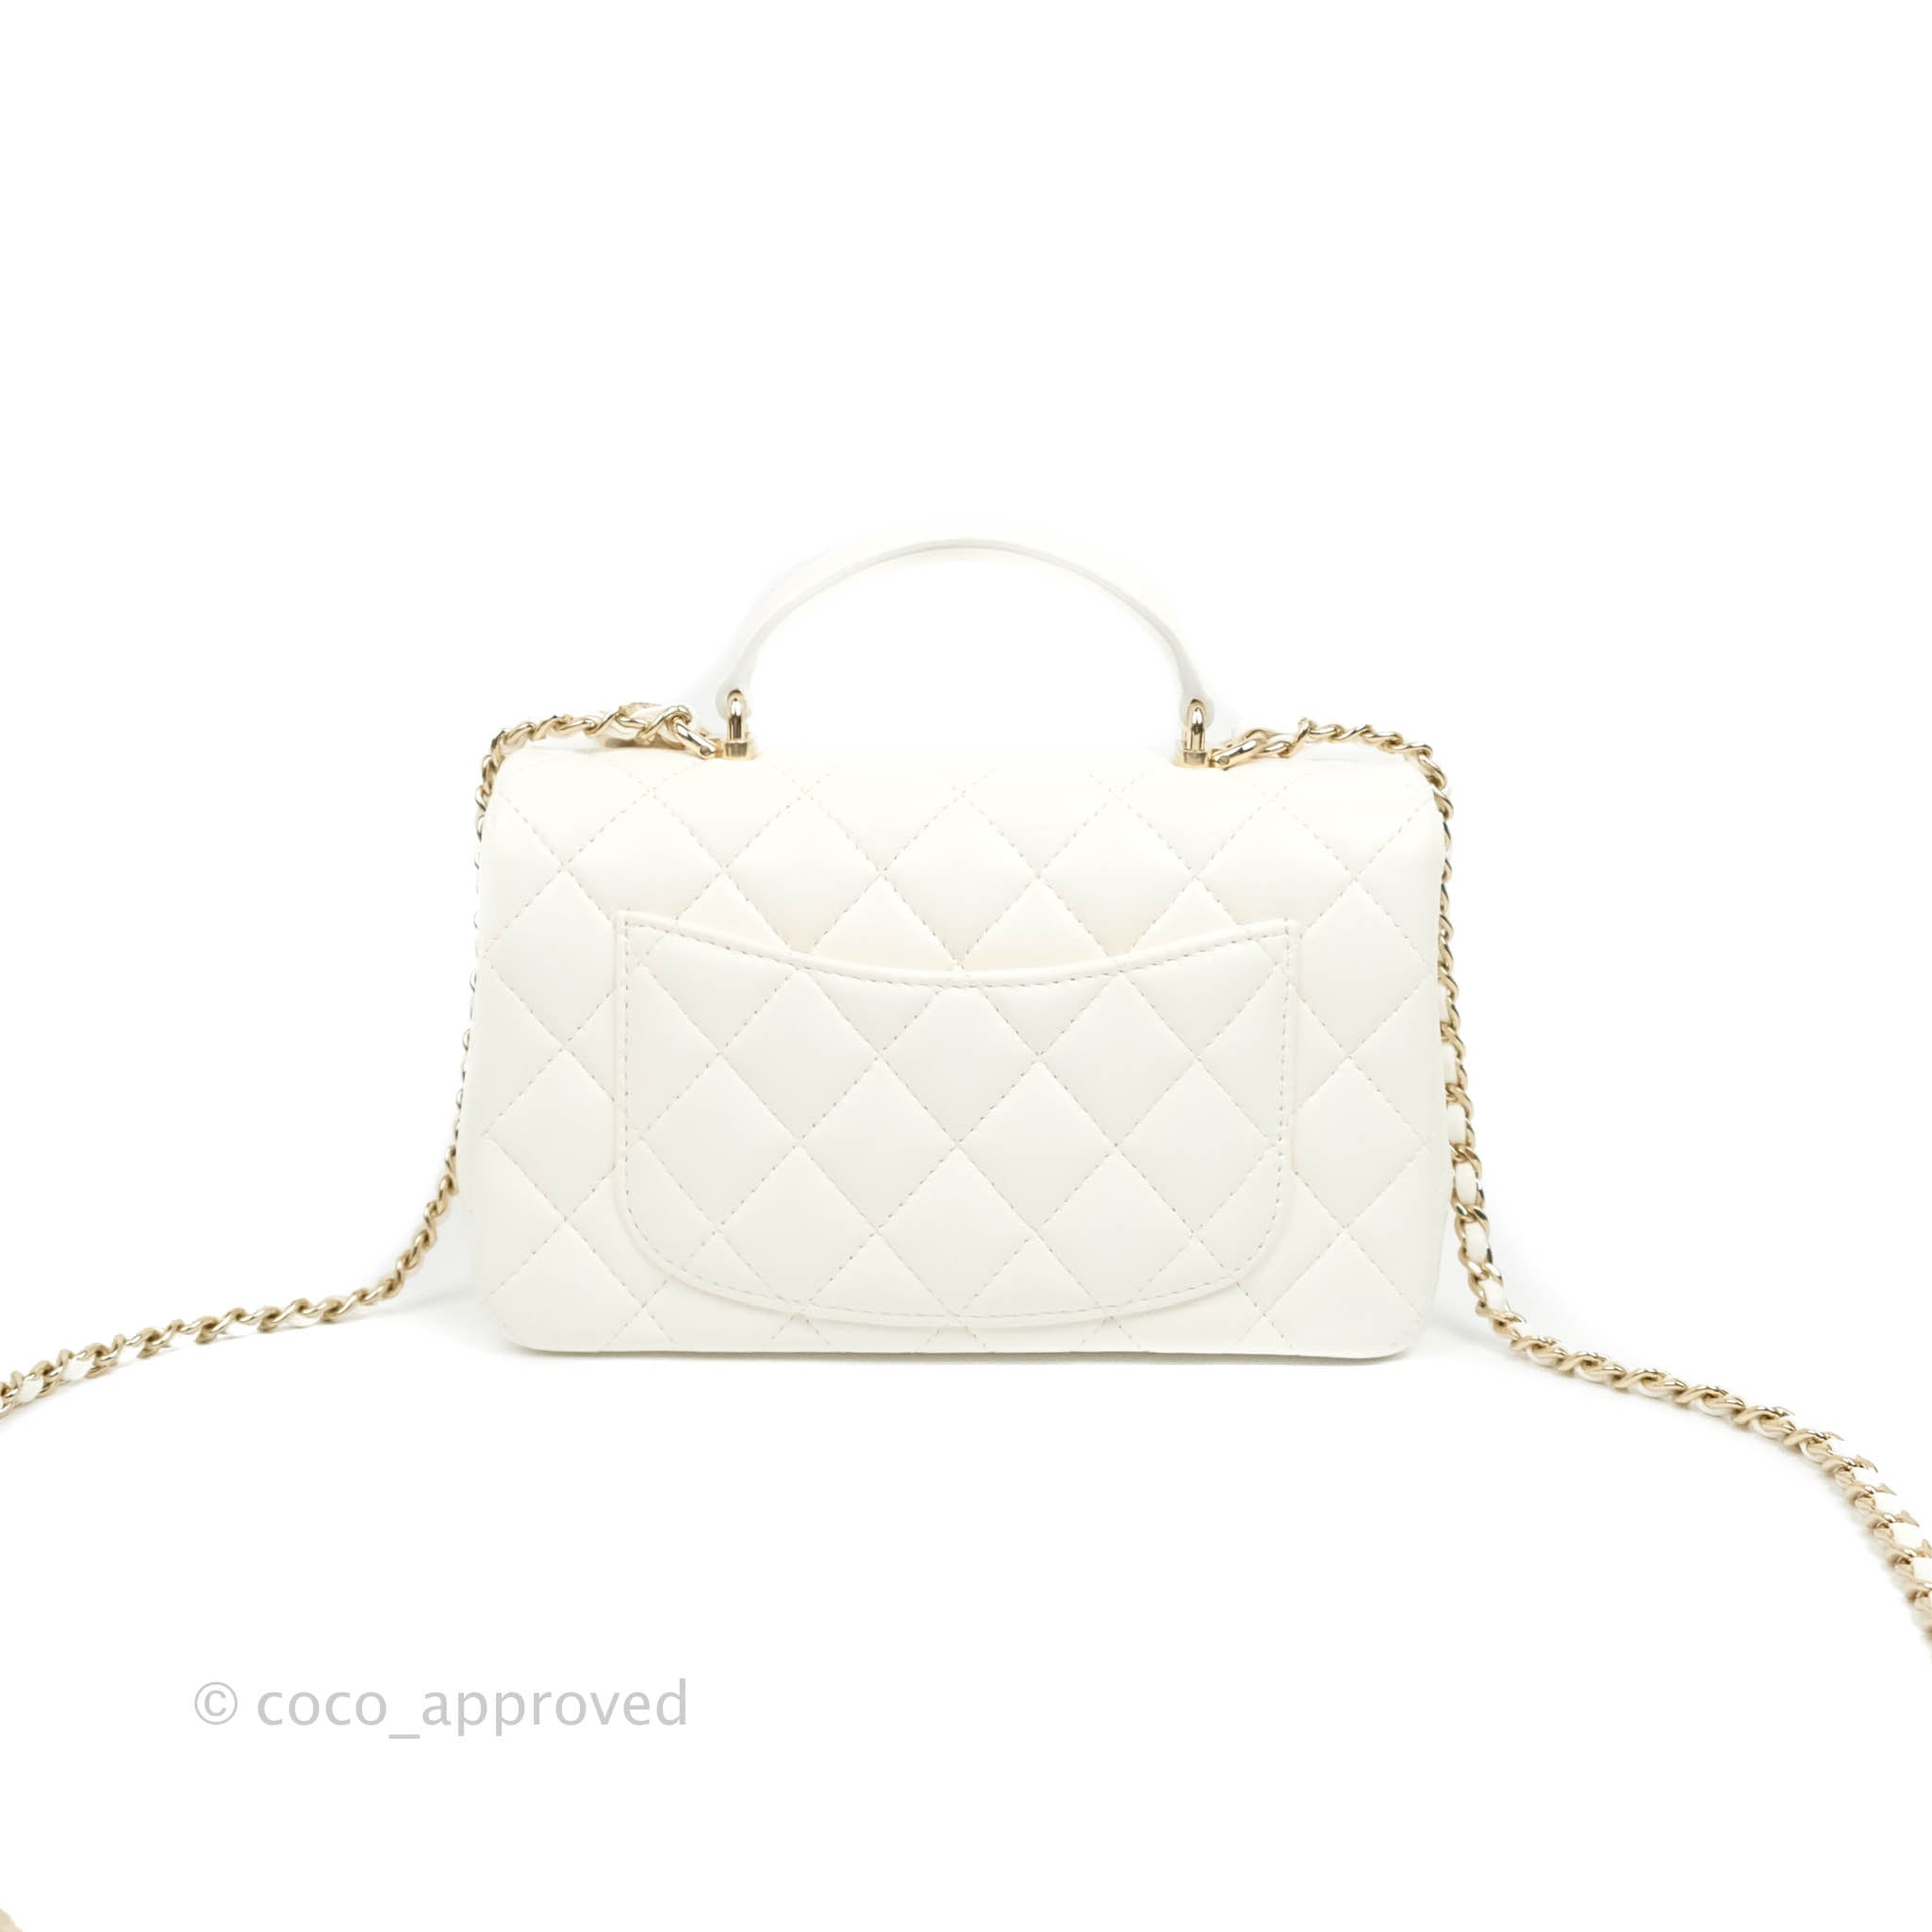 Chanel #CHANELSpringSummer Mini Flap Bag With Top Handle